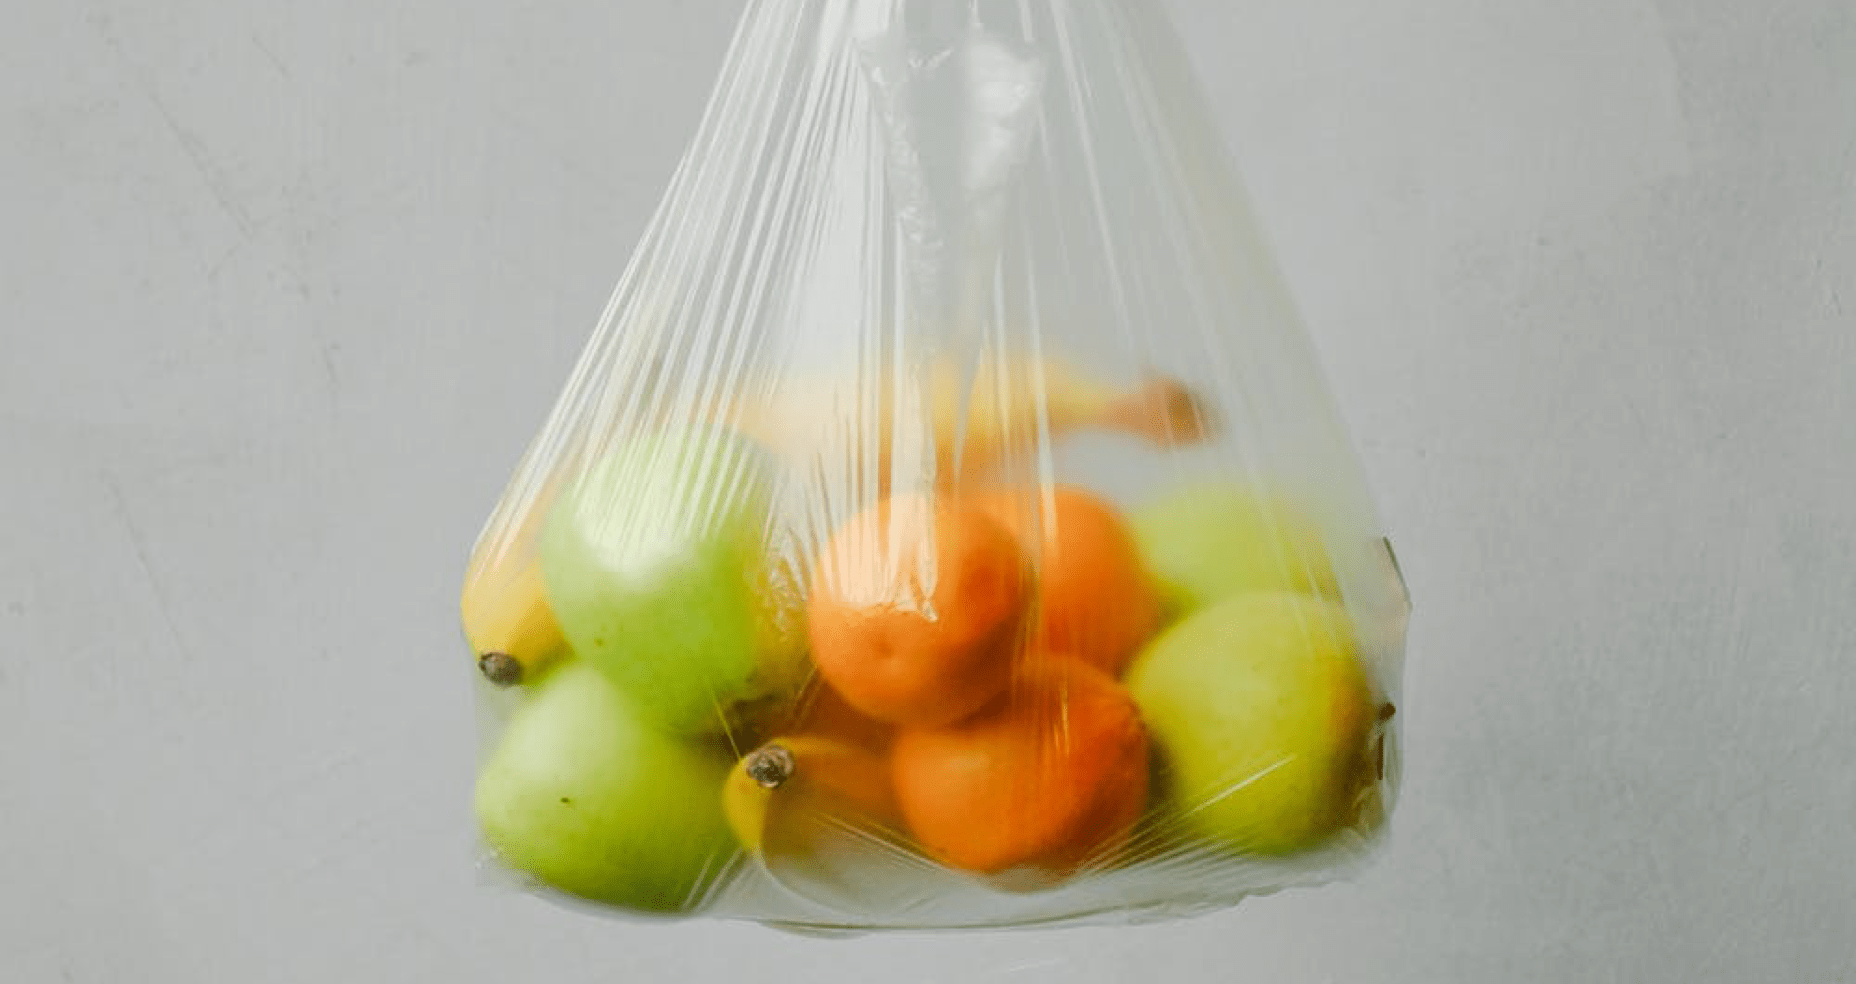 plastic bag filled with apples, oranges and bananas